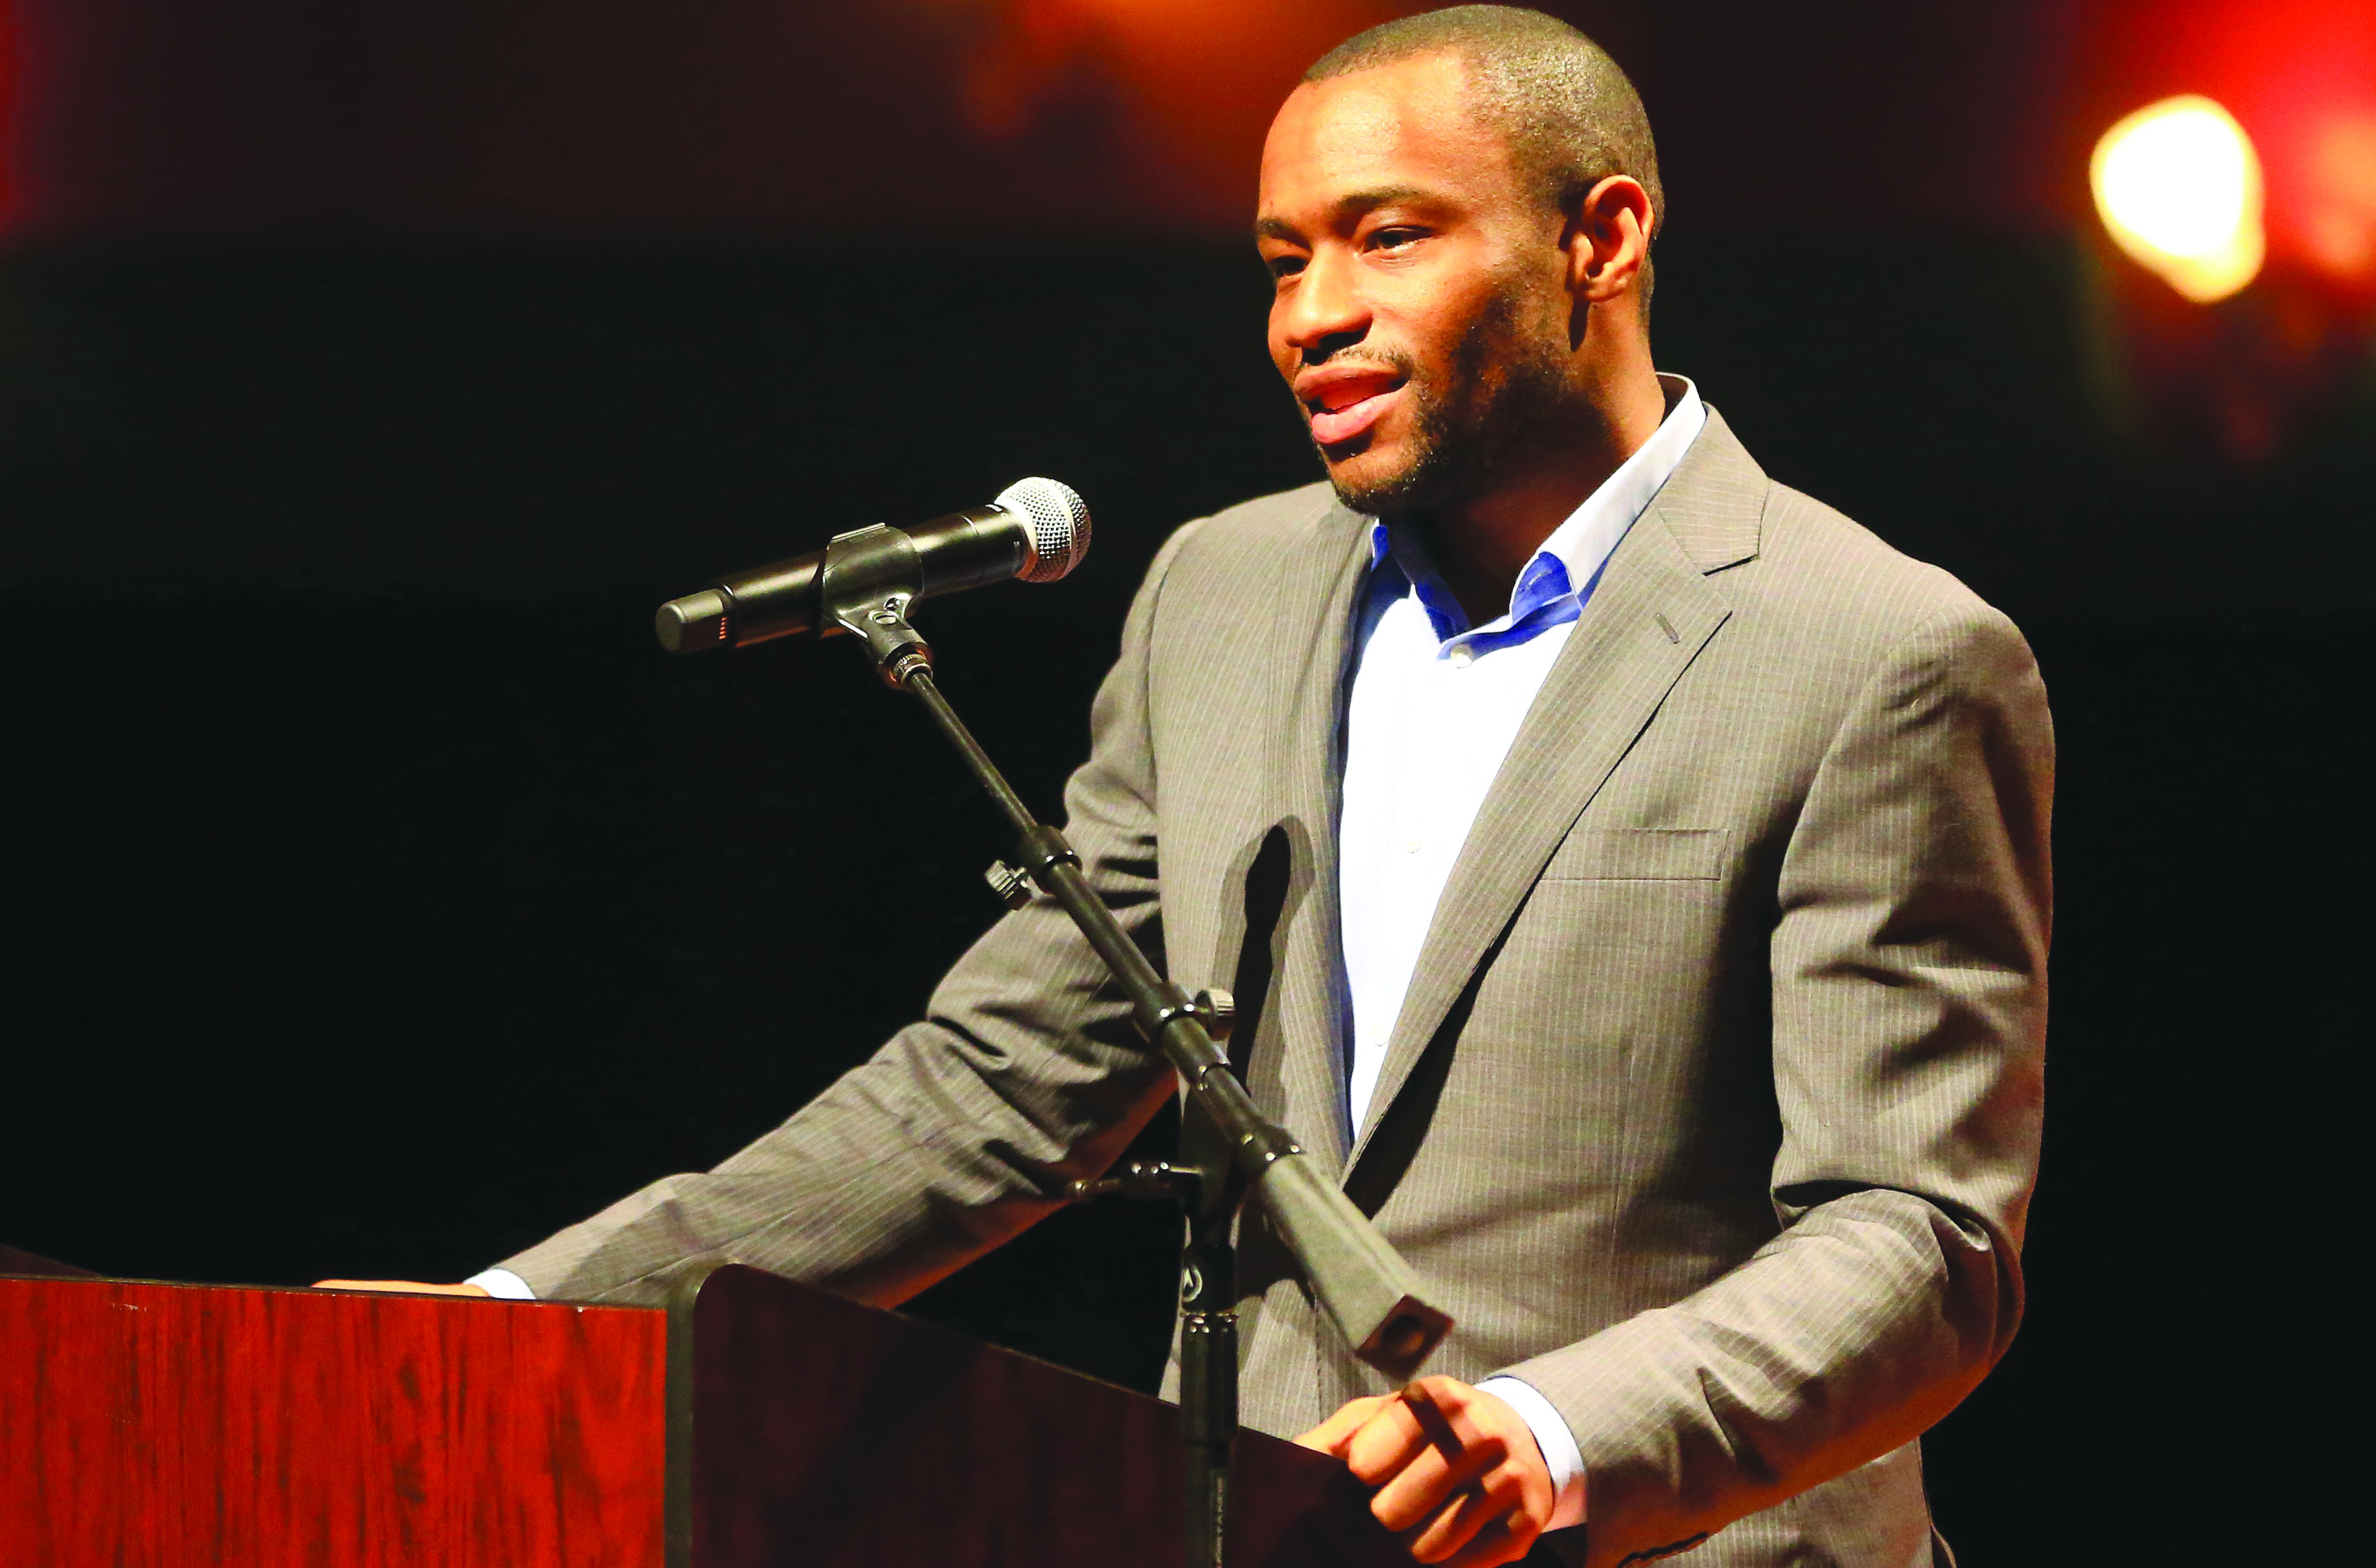 GABE HERNANDEZ/CALLER-TIMES Dr. Marc Lamont Hill speaks during the 4th Annual Dr. Martin Luther King, Jr. Community Celebration Wednesday, Jan. 26, 2016, at Texas A&M University-Corpus Christi in Corpus Christi.